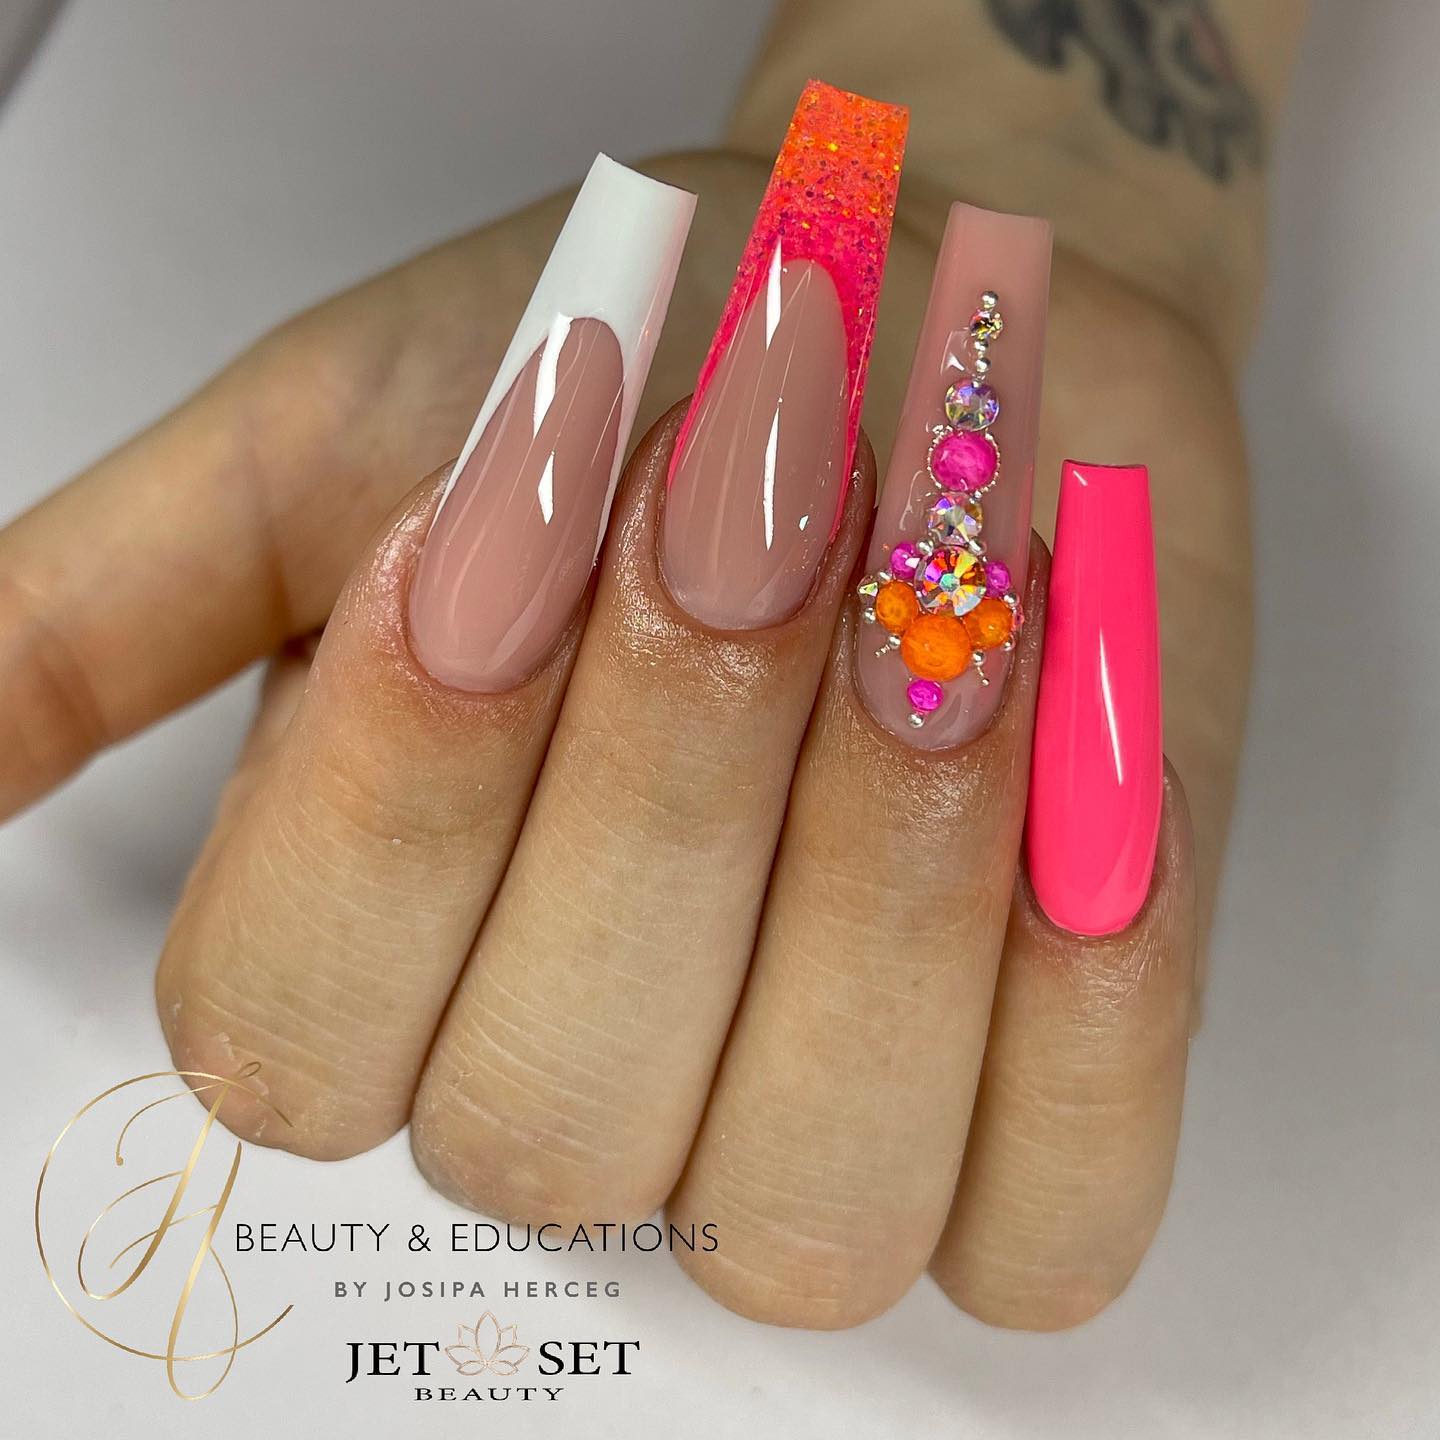 Long bright pink and done in all these shades of pink will suit women who enjoy elegant acrylic nails. Show them off only if you fully trust your nail tech.